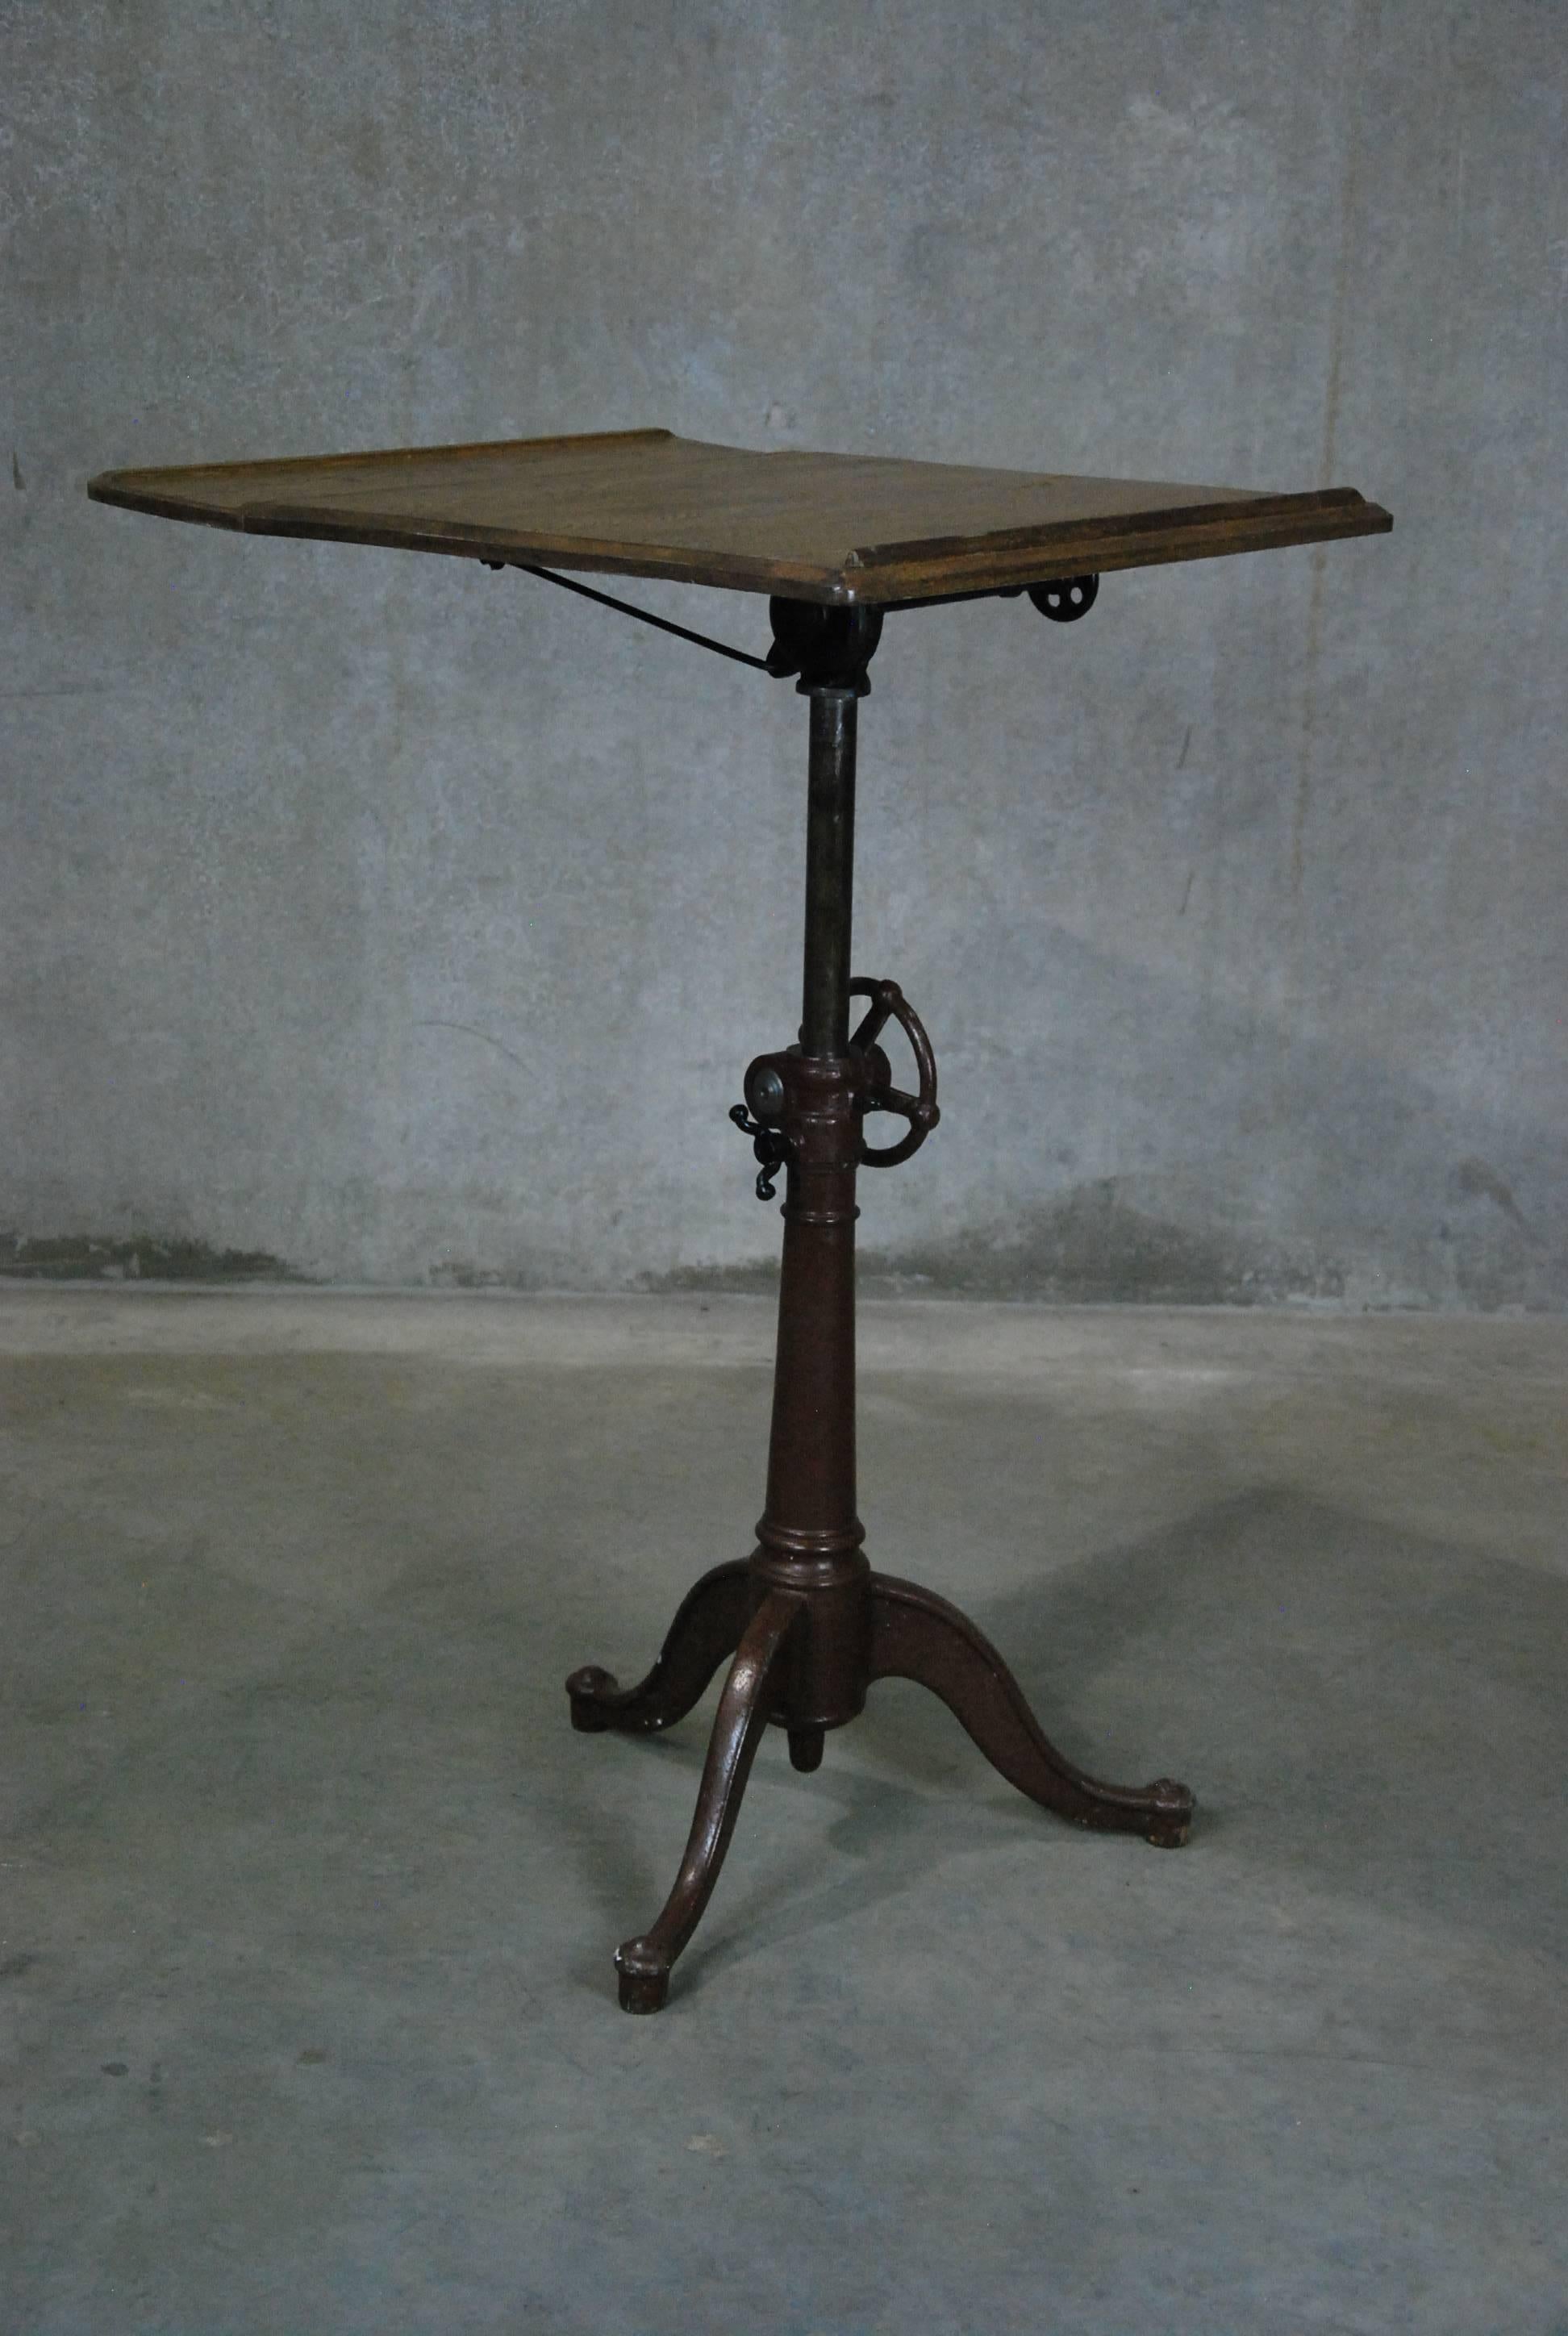 Beautiful adjustable American made drafting table manufactured by the Washburn shops. This example is perfect condition with fully functioning hardware. Would make a great hostess stand in a restaurant.

The Washburn Shops was built in 1868 along